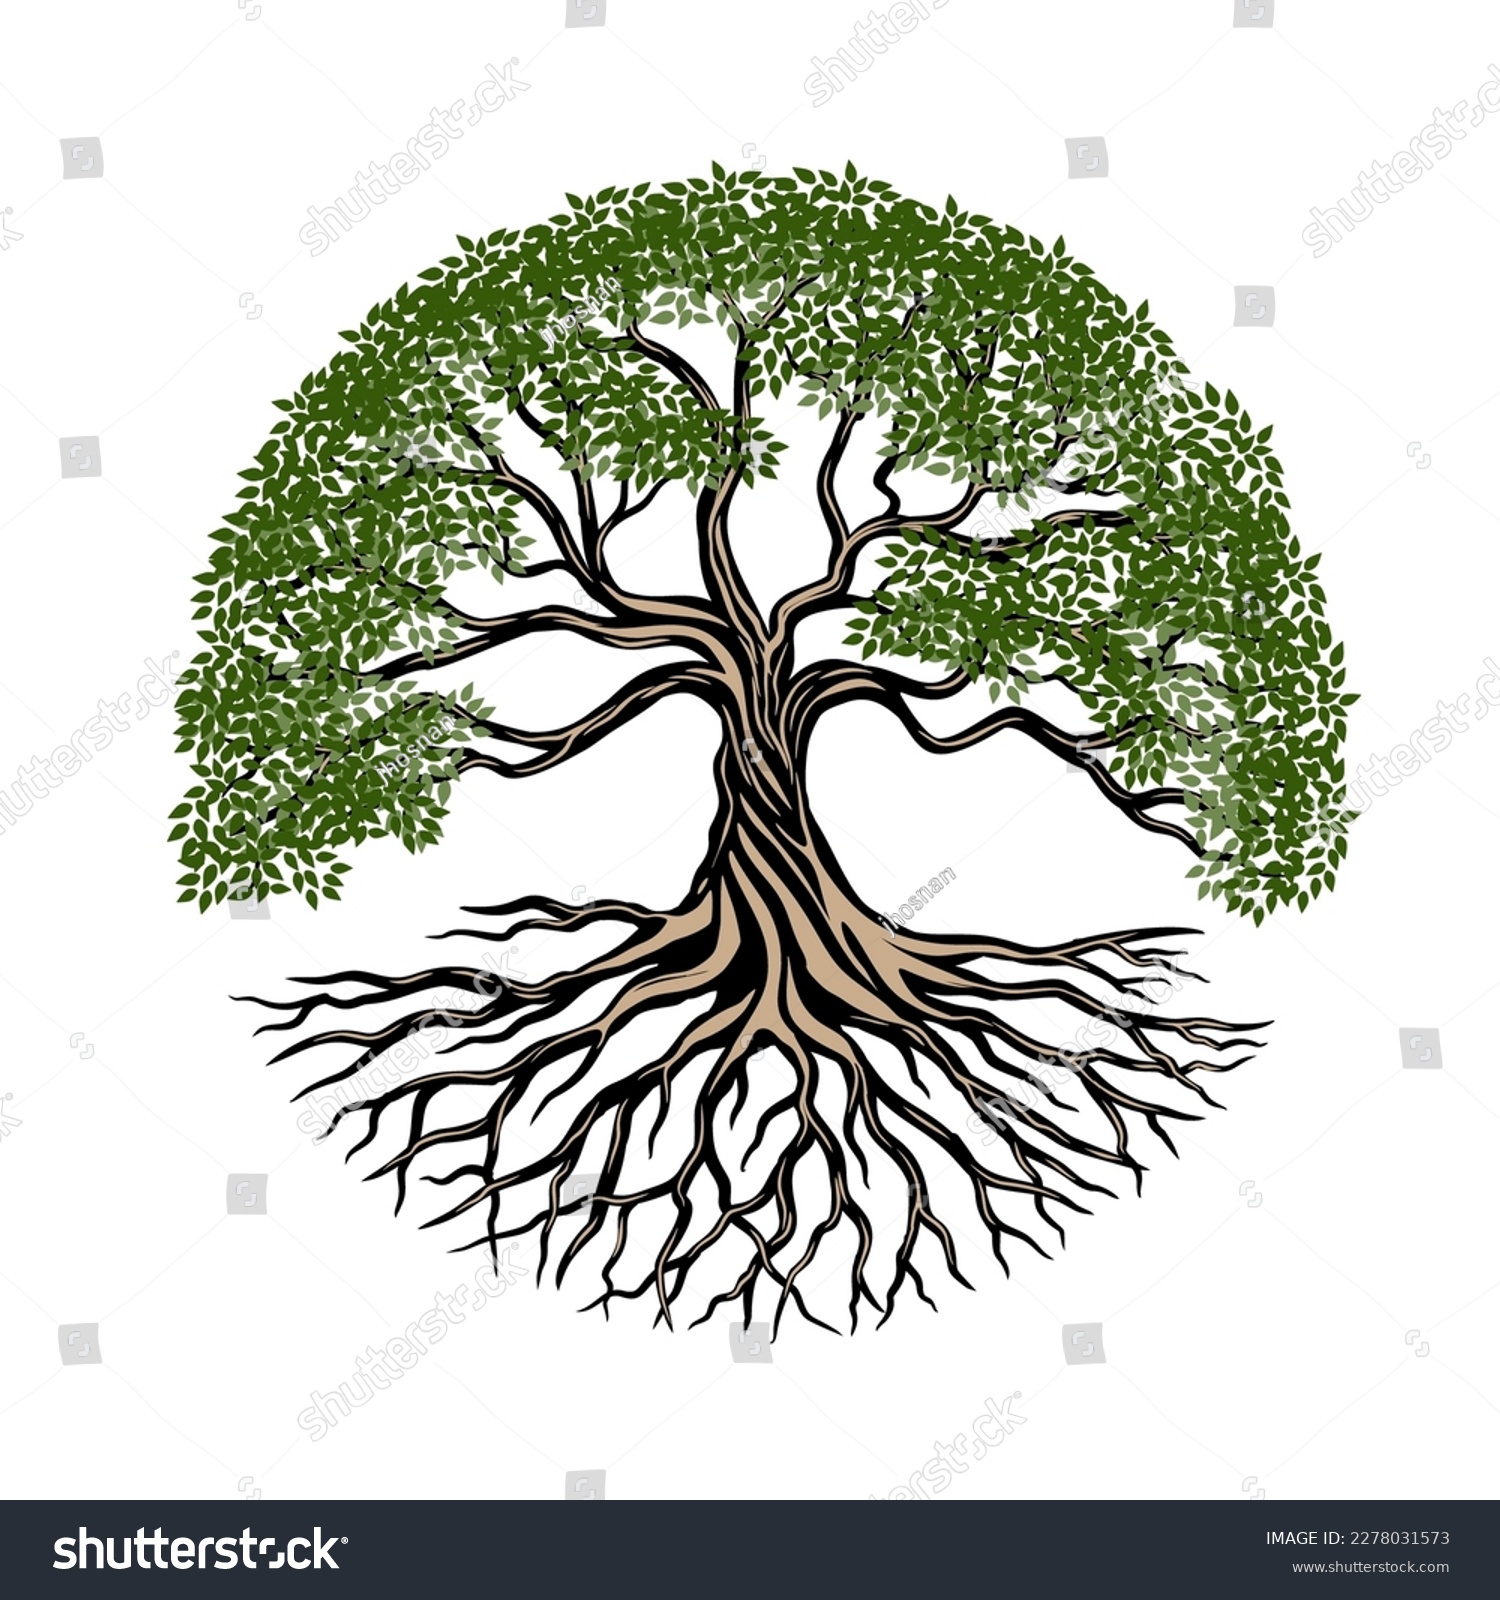 SVG of rooted tree logo design. banyan tree with circular shape svg